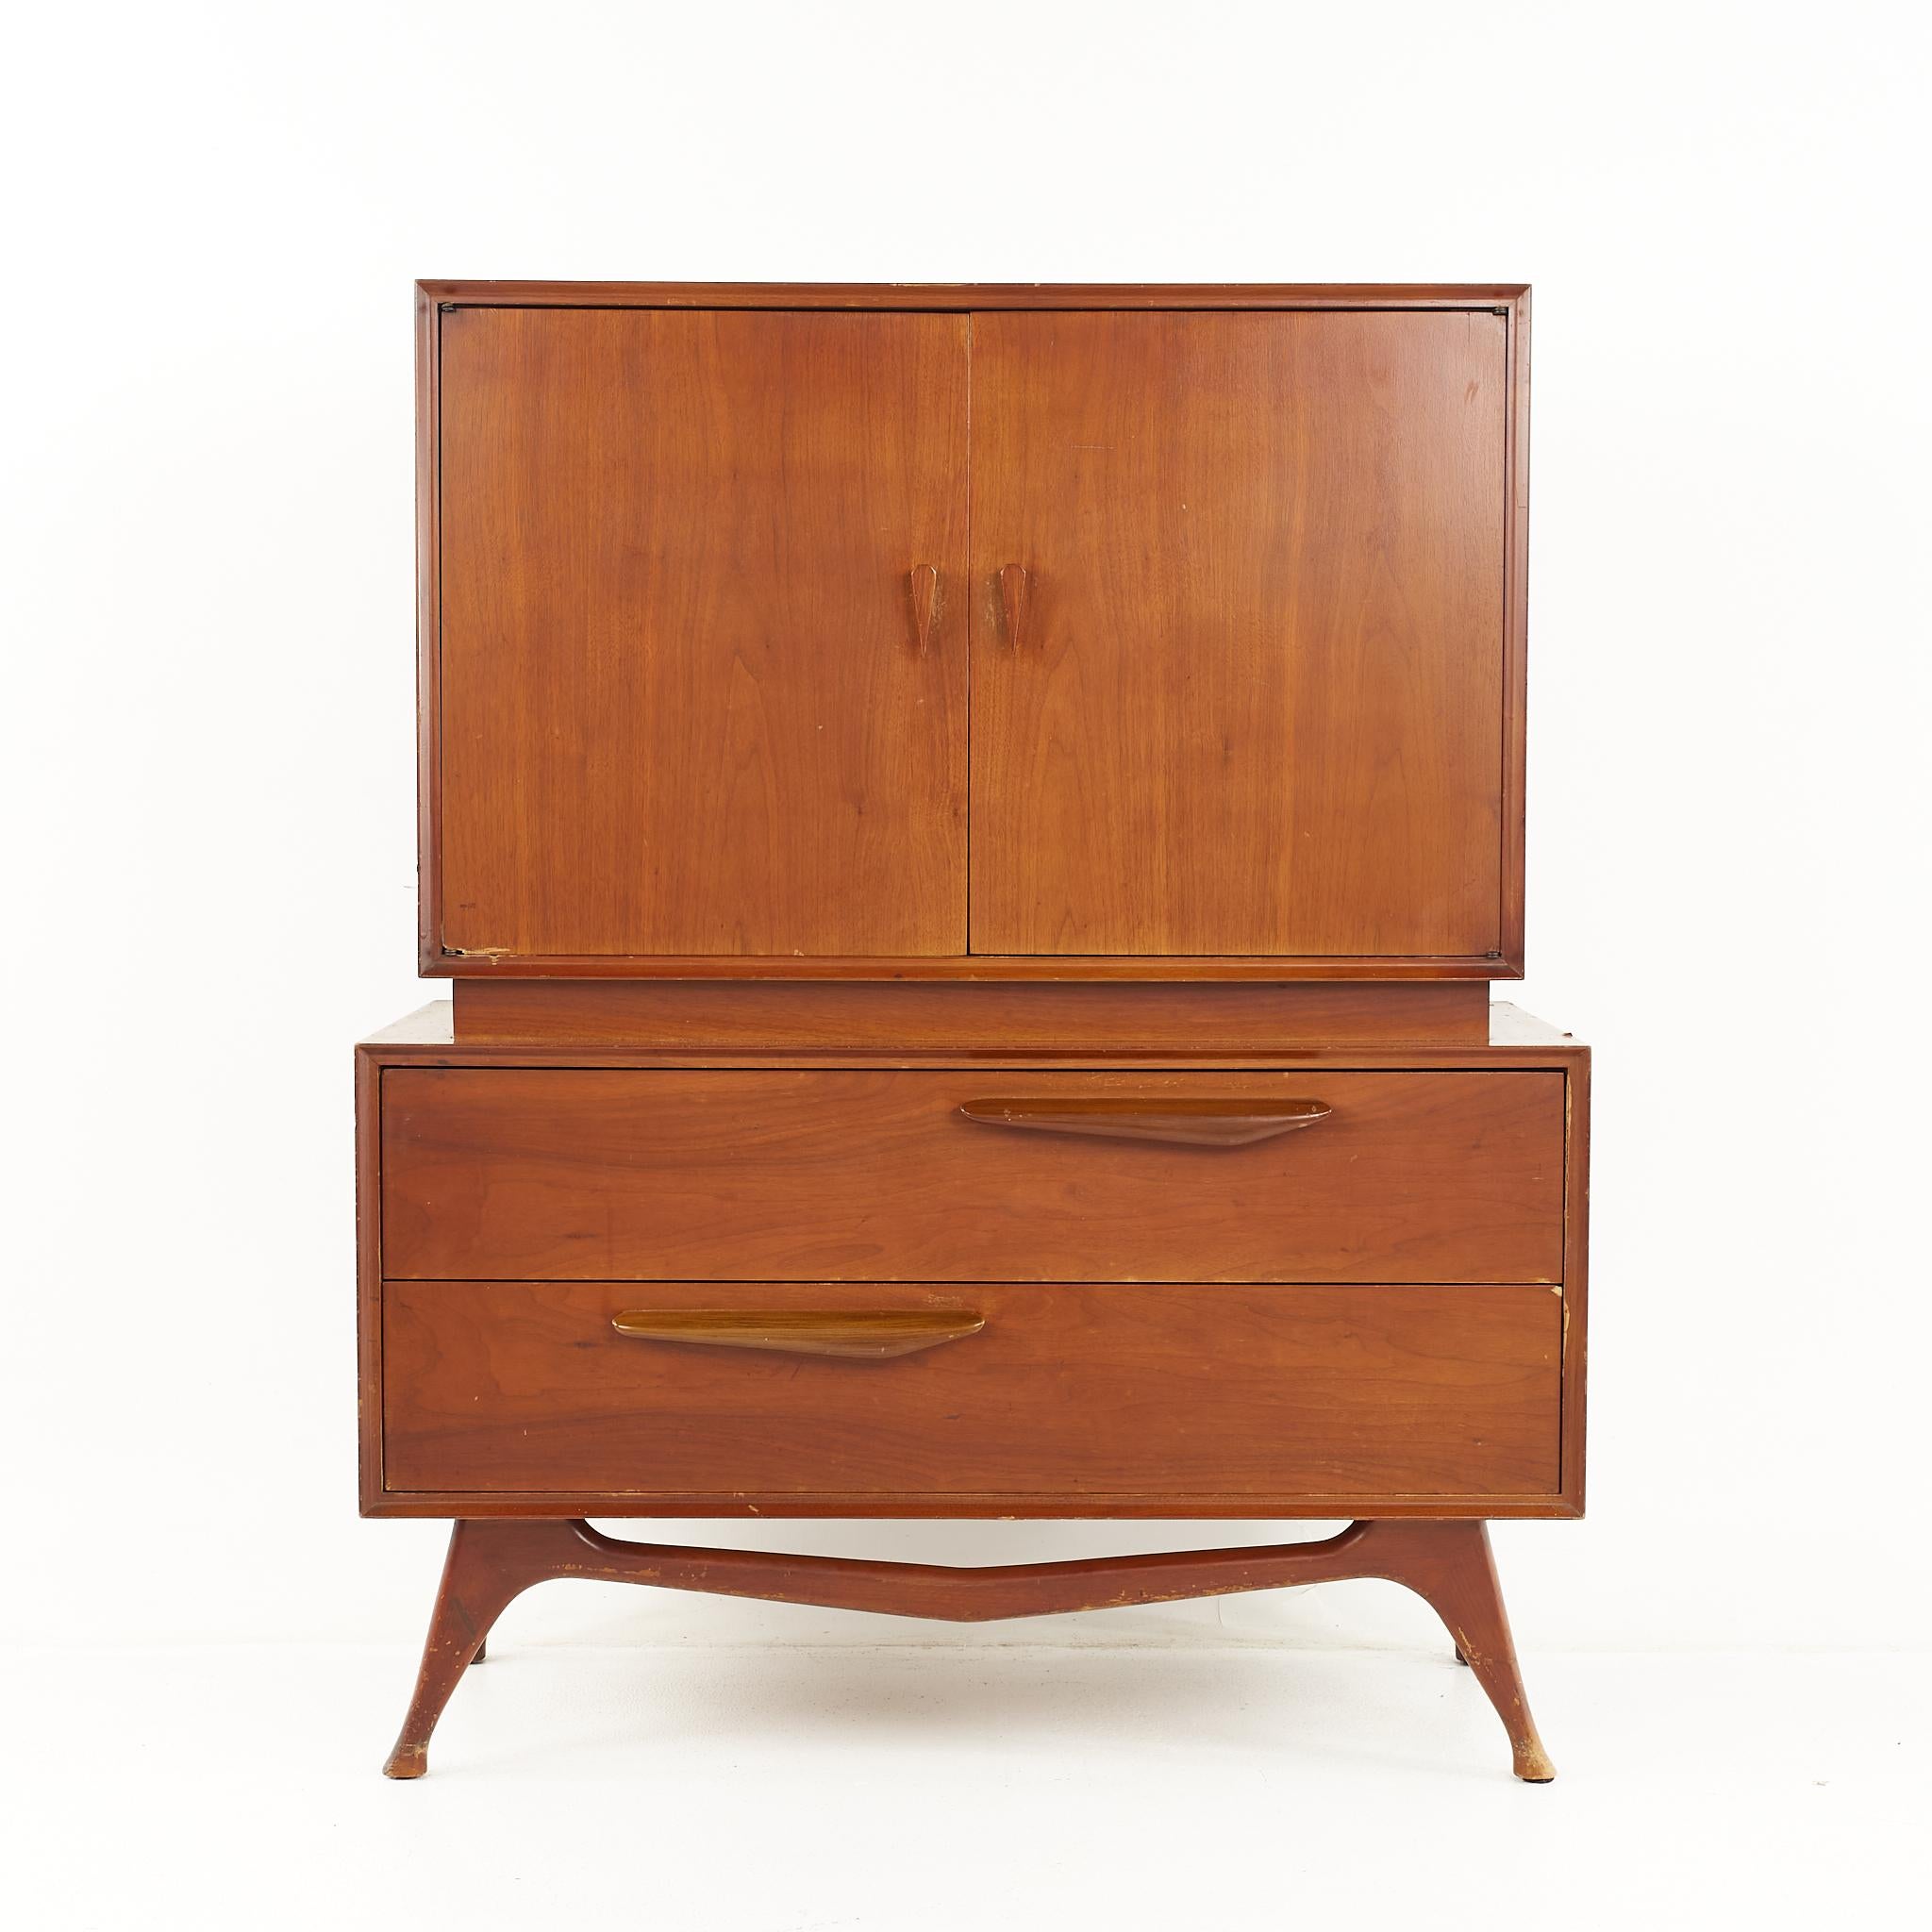 Albert Parvin style mid century walnut gentlemans highboy dresser

The dresser measures: 40 wide x 19 deep x 50 inches high 

All pieces of furniture can be had in what we call restored vintage condition. That means the piece is restored upon